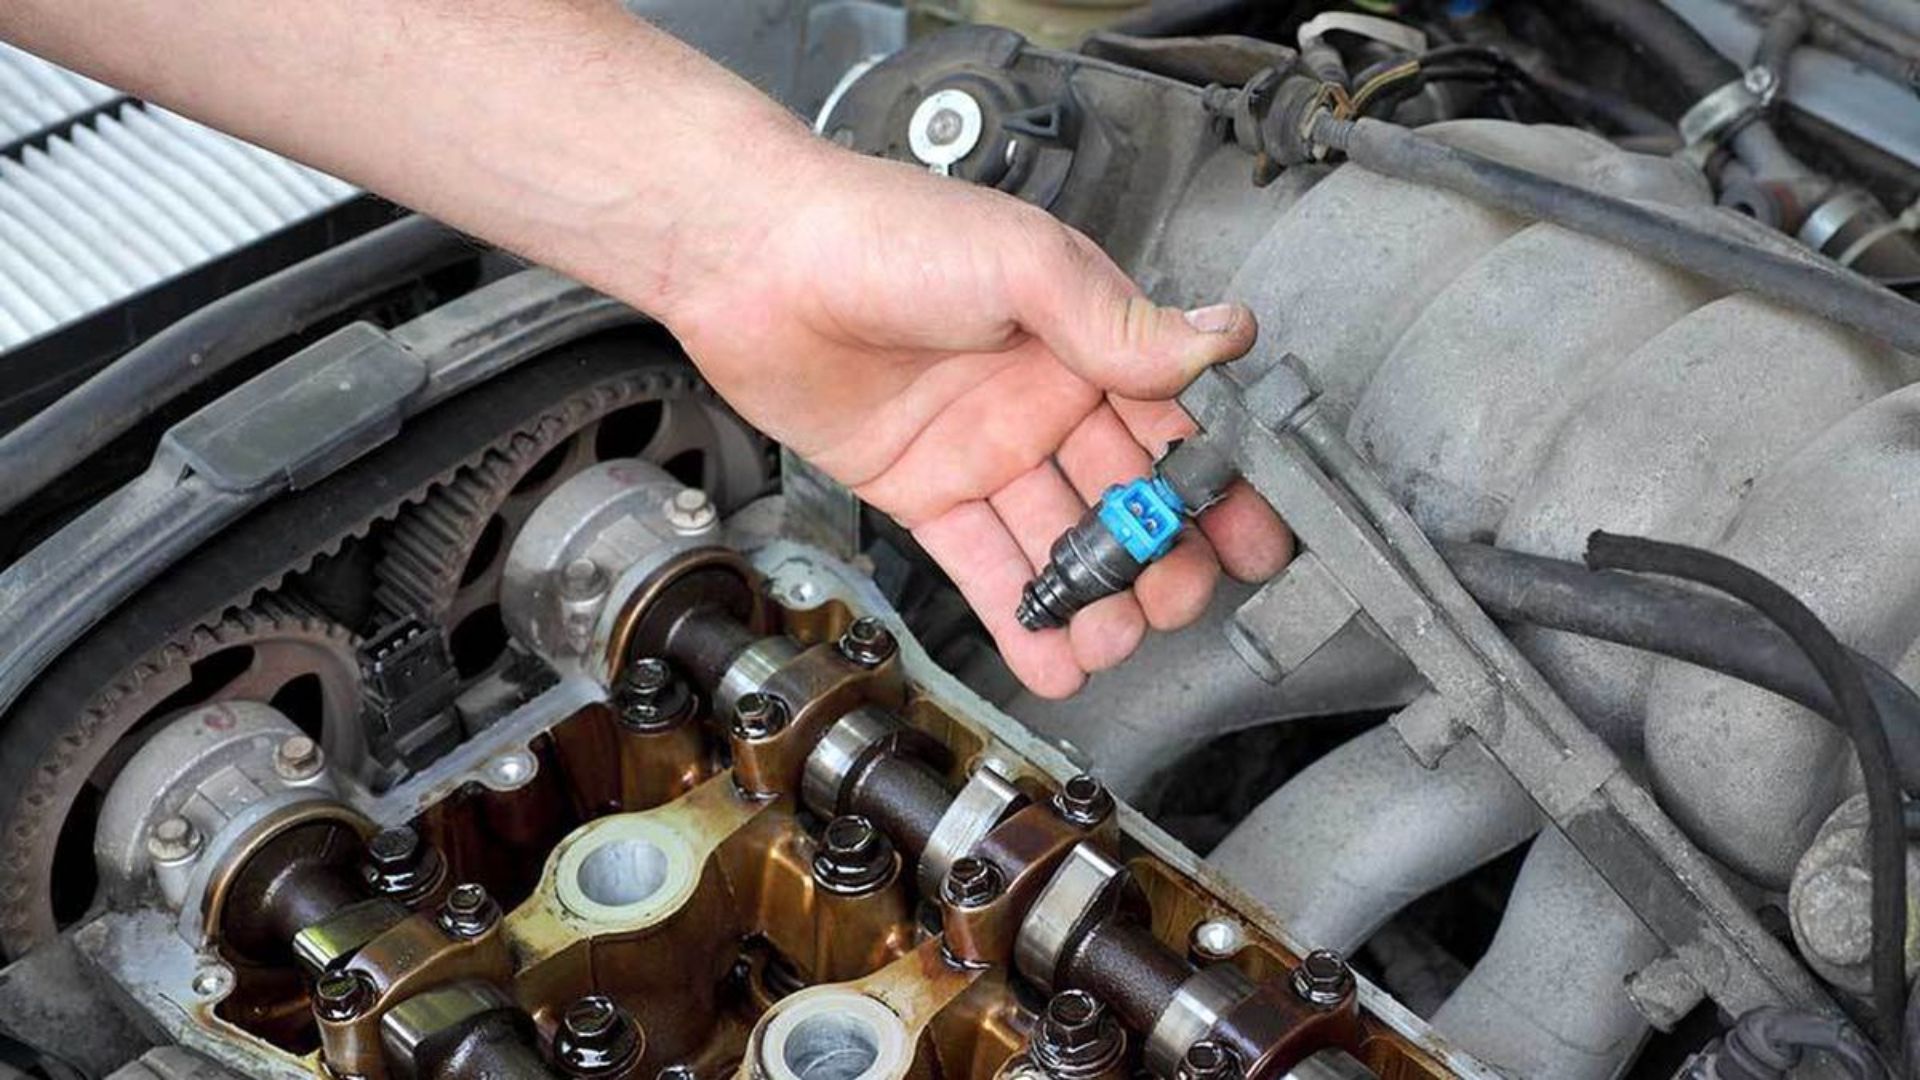 Fuel Injector Cleaning Made Easy